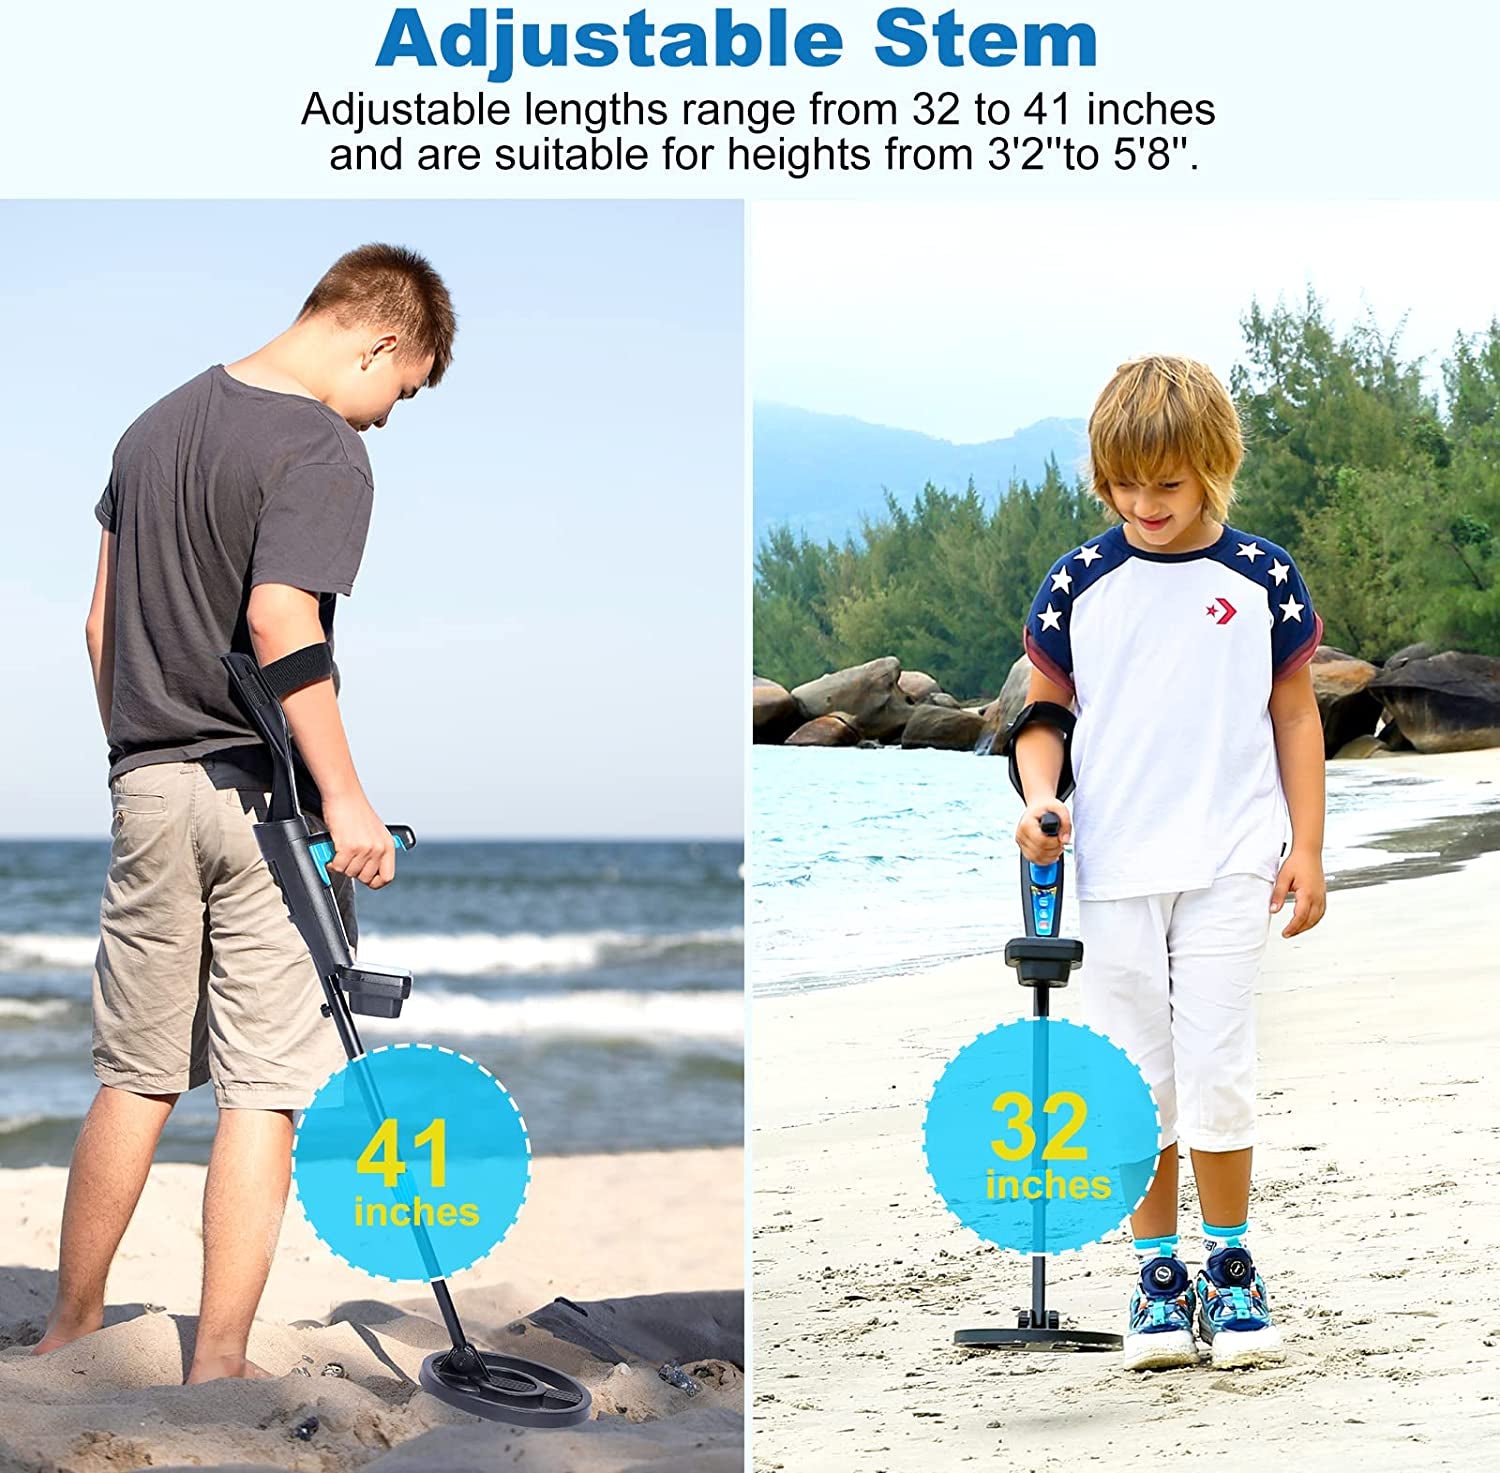 Metal Detector for Kids with 8'' Waterproof Coil, 32-41 Inches Adjustable Stem Kids Metal Detector, Lightweight and High Accuracy Gold Detector with DSP Chip